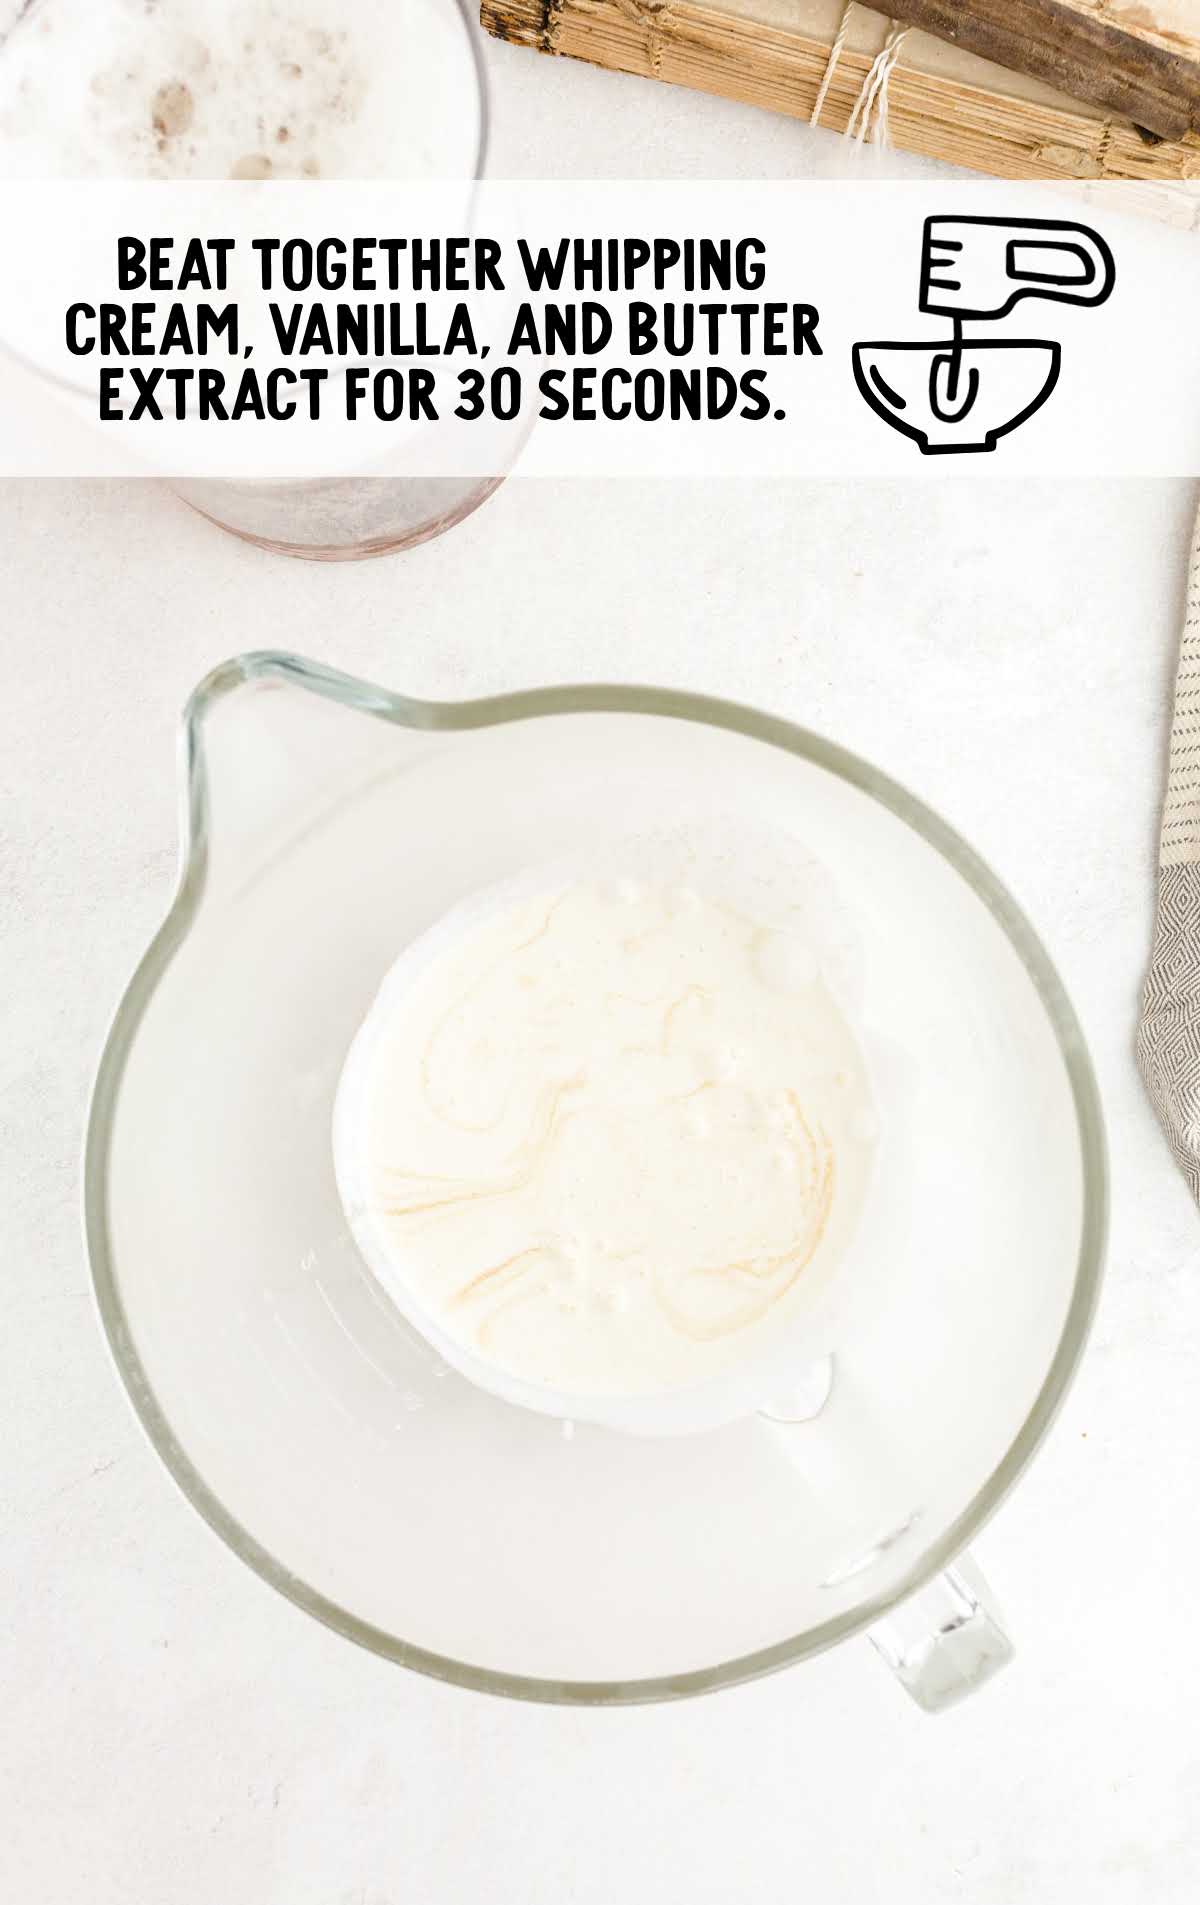 whipping cream, vanilla extract, and butter extract combined in a cup